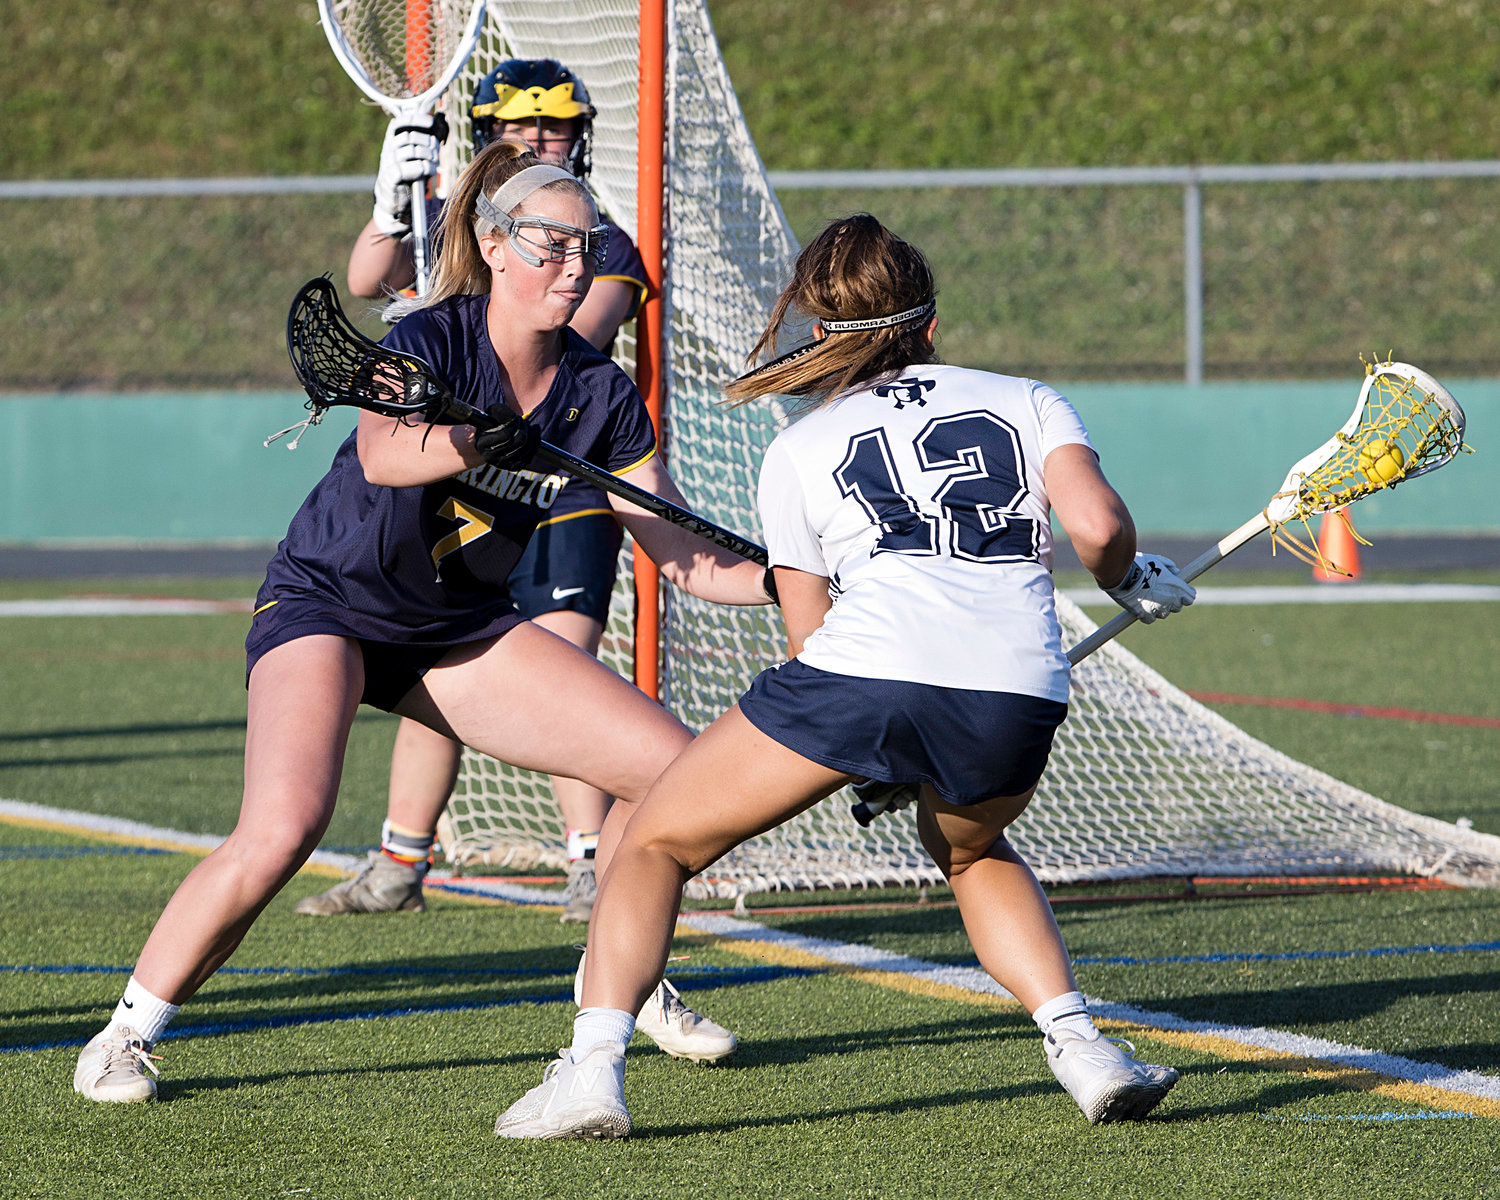 Amy LaBelle forces a Moses Brown opponent away from the goal during the first half of the Division 1 girls lacrosse championship game.